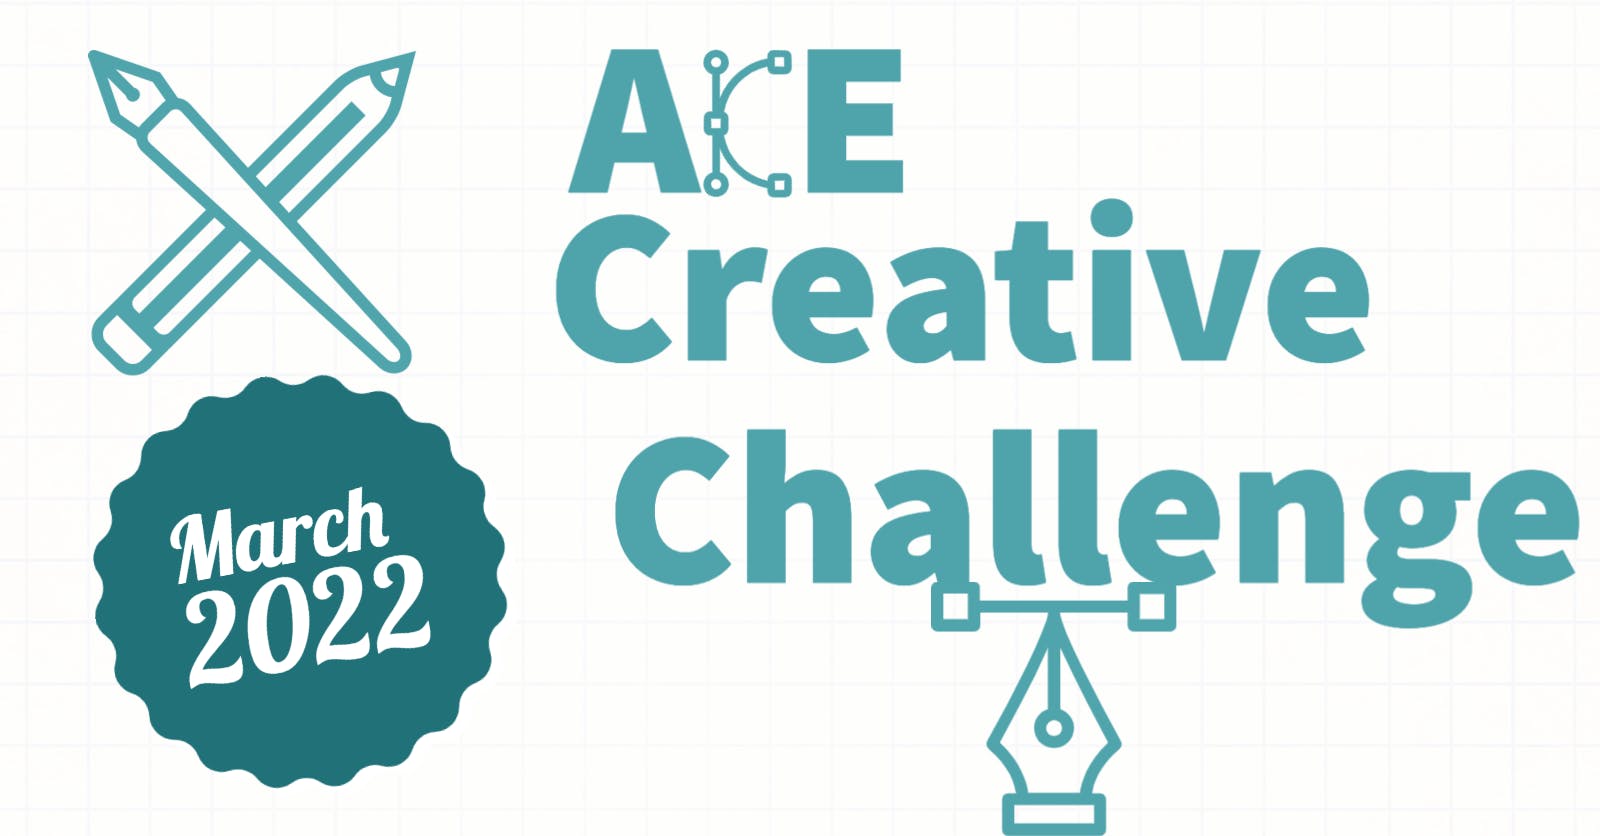 March 2022 ACE Creative Challenge